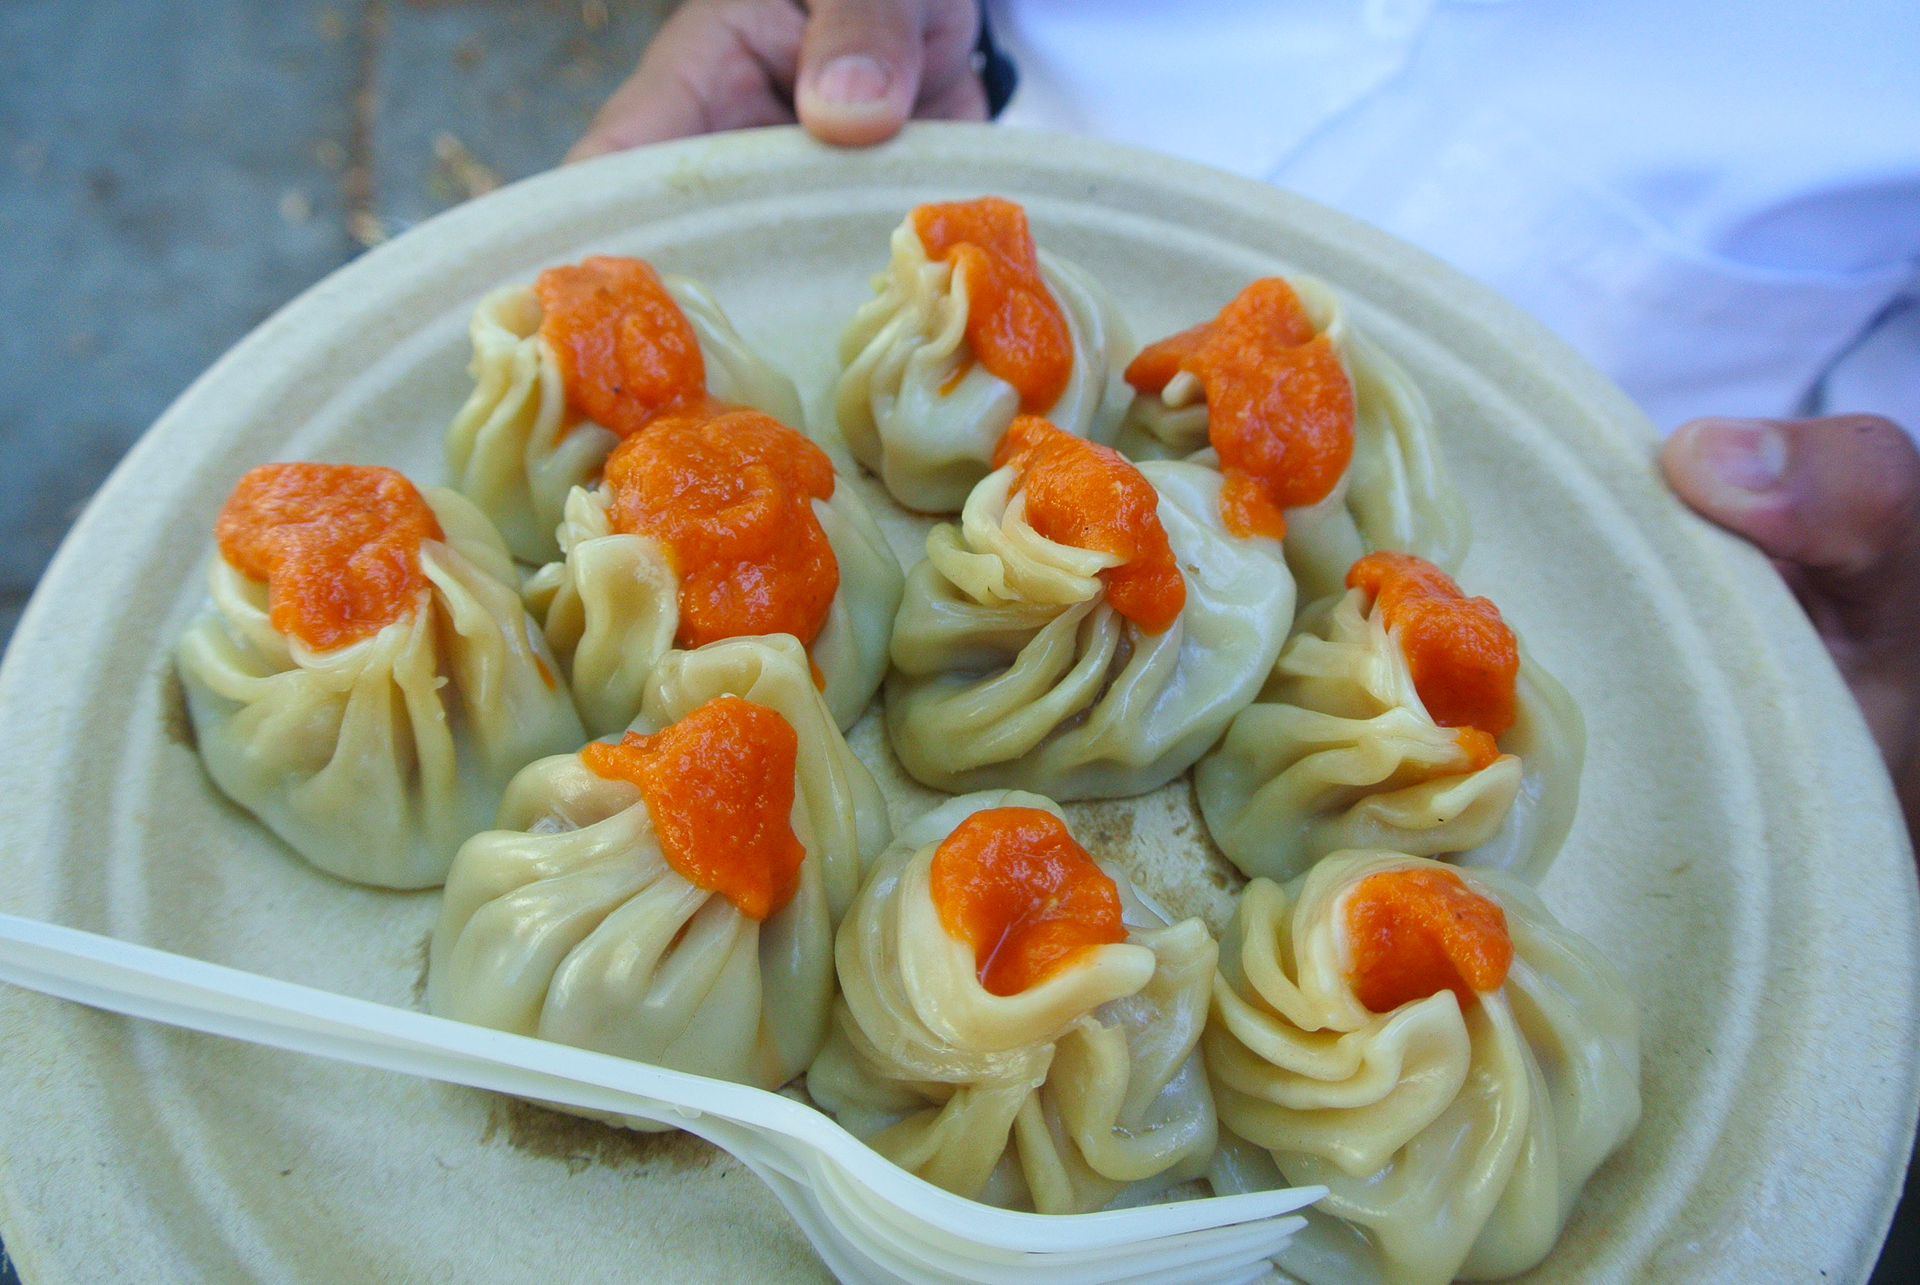 Momos from Bini's Kitchen, topped with tomato sauce